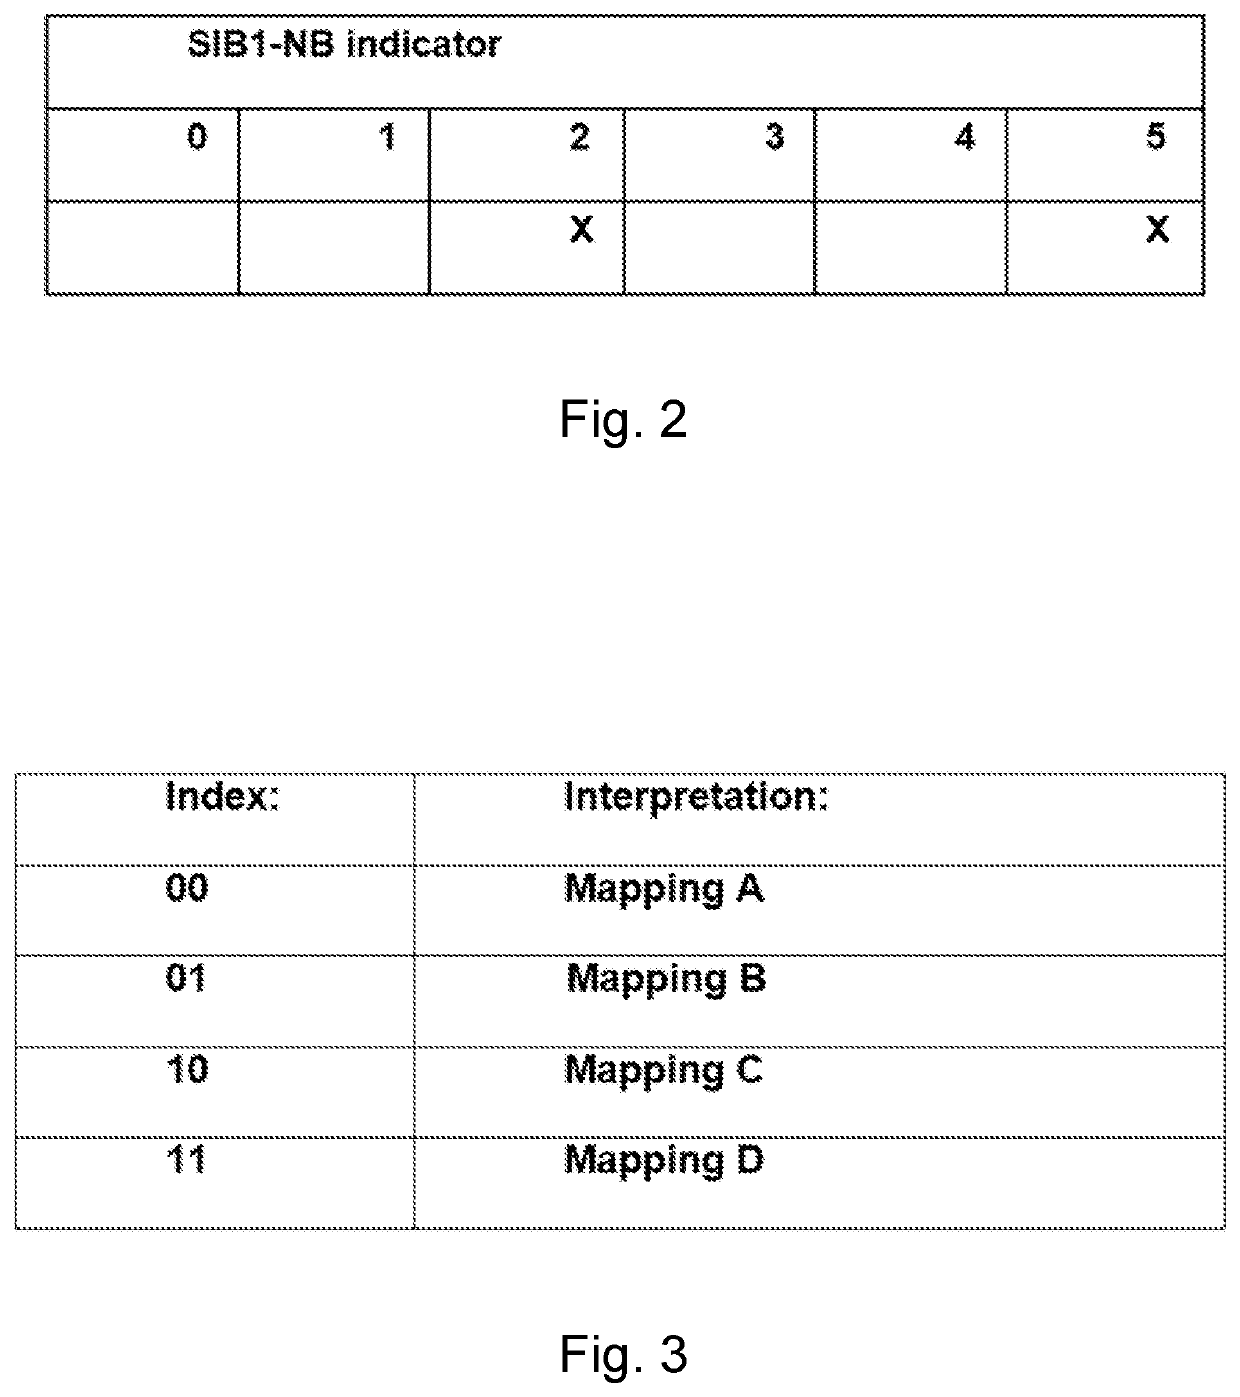 Configuration of additonal system information block repetitions